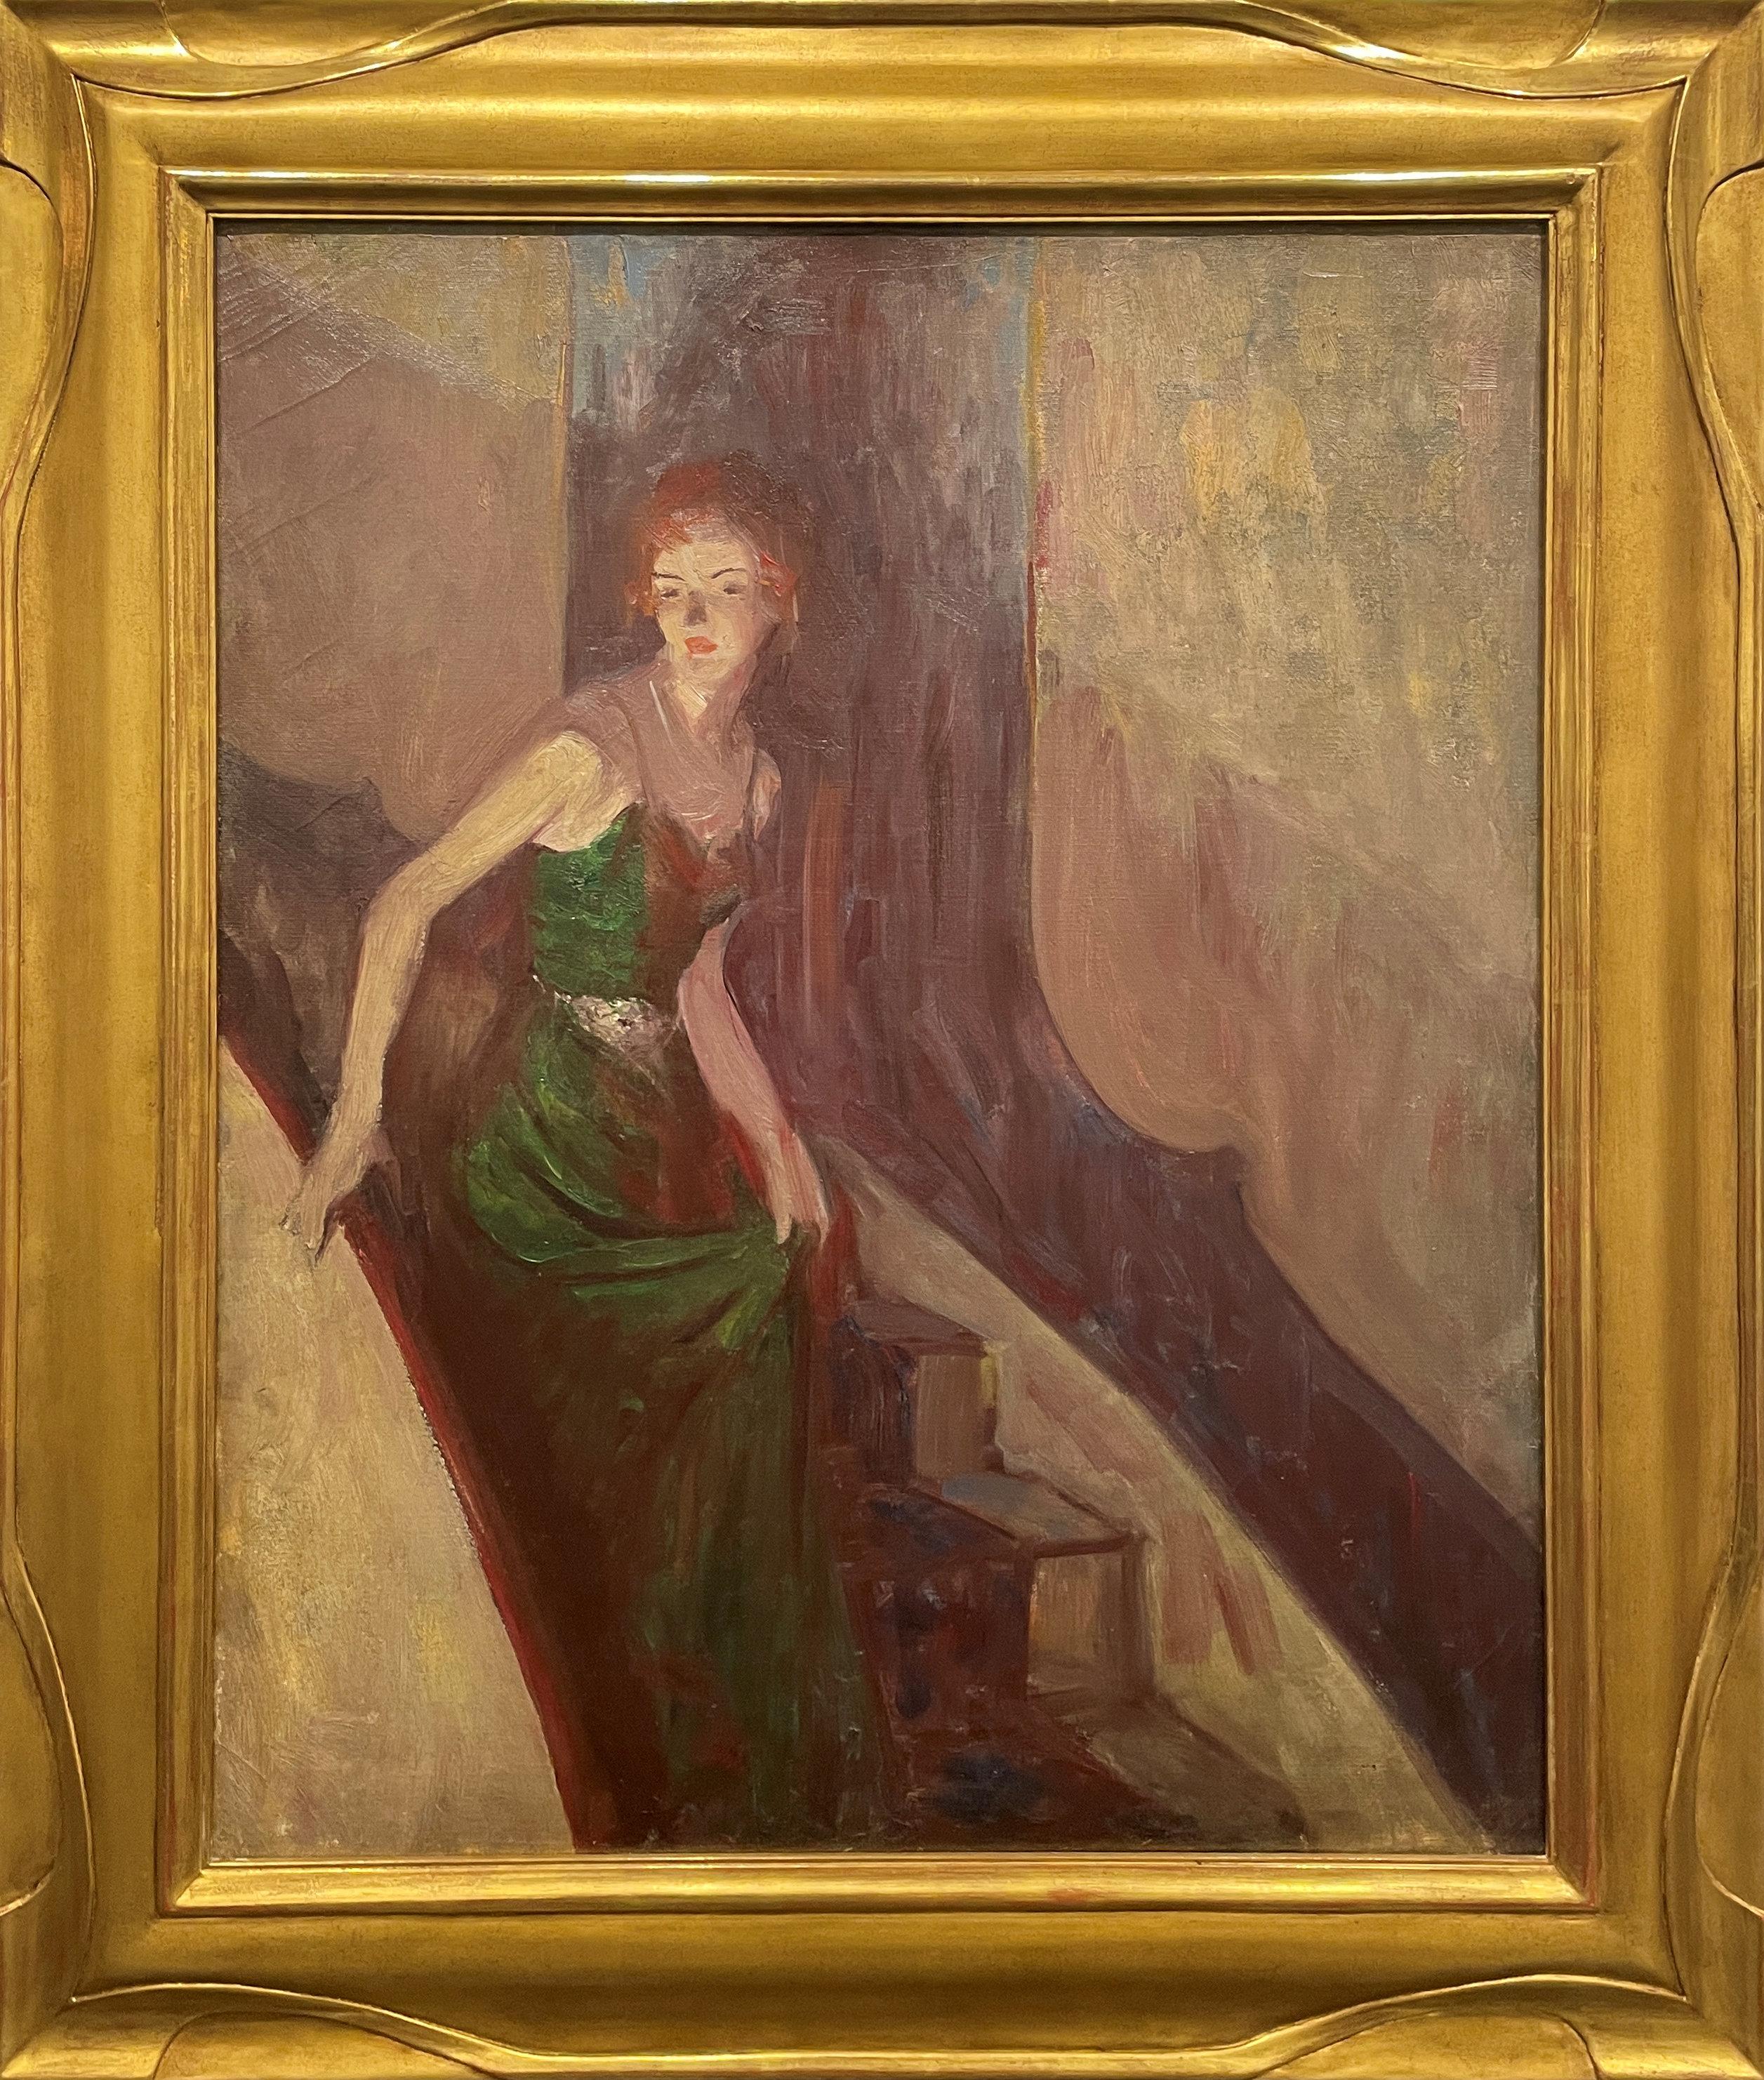 Everett Shinn
Woman on a Staircase, Sketch, circa 1935
Signed on the reverse and on the stretcher
Oil on canvas
30 x 25 inches

Everett Shinn, a future member of the Eight and remarkable, rather theatrical personality was born at Woodstown, New